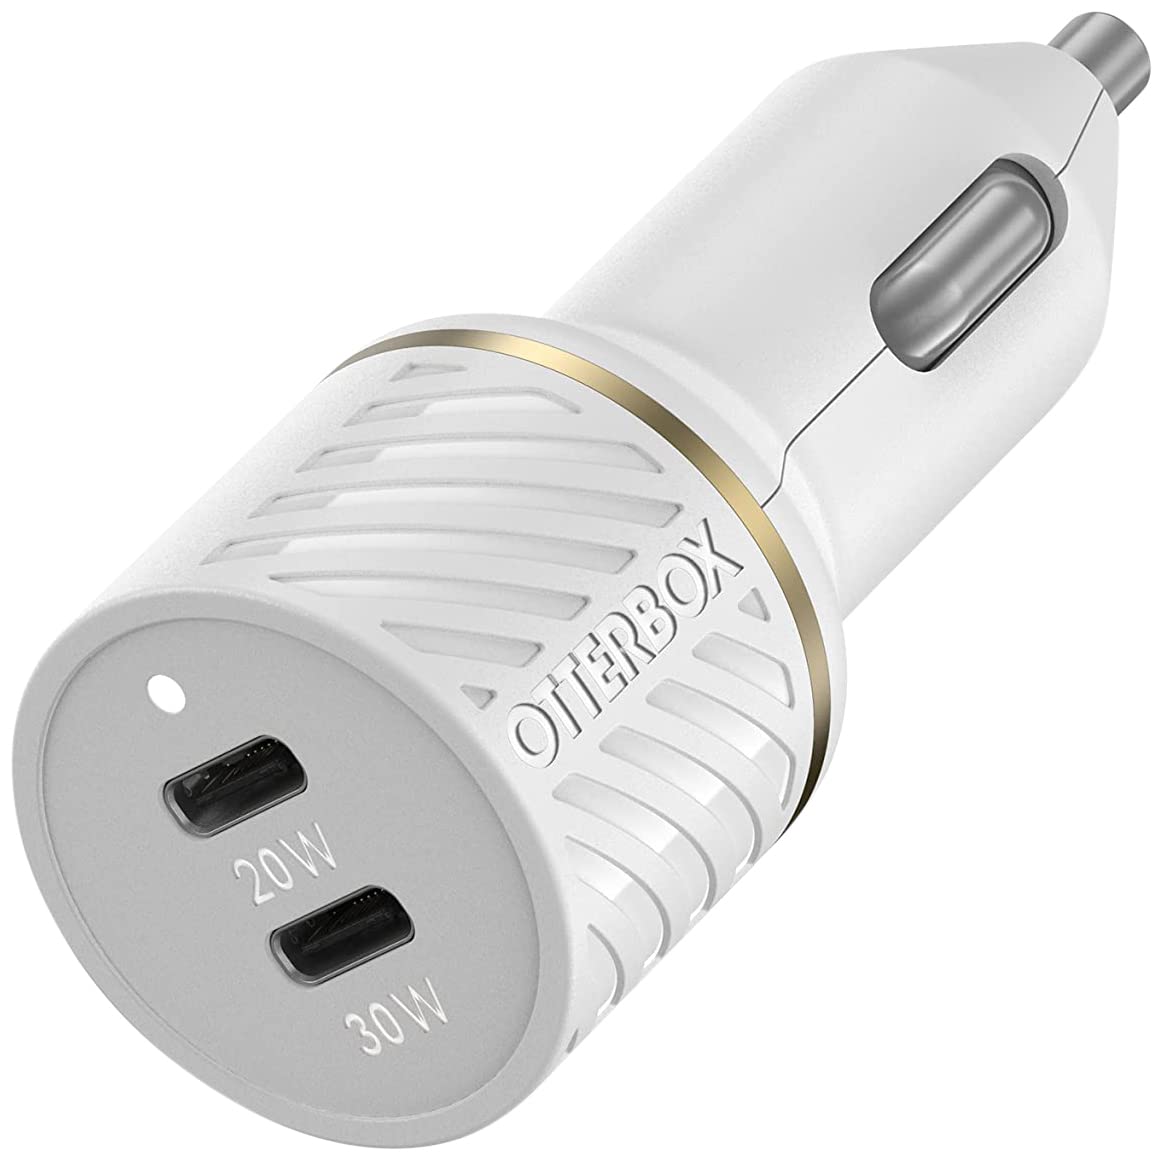 Fast Charge PD Car Charger USB-C 20W w/Lightning Cable 3.3 ft Cloud Dust (White)